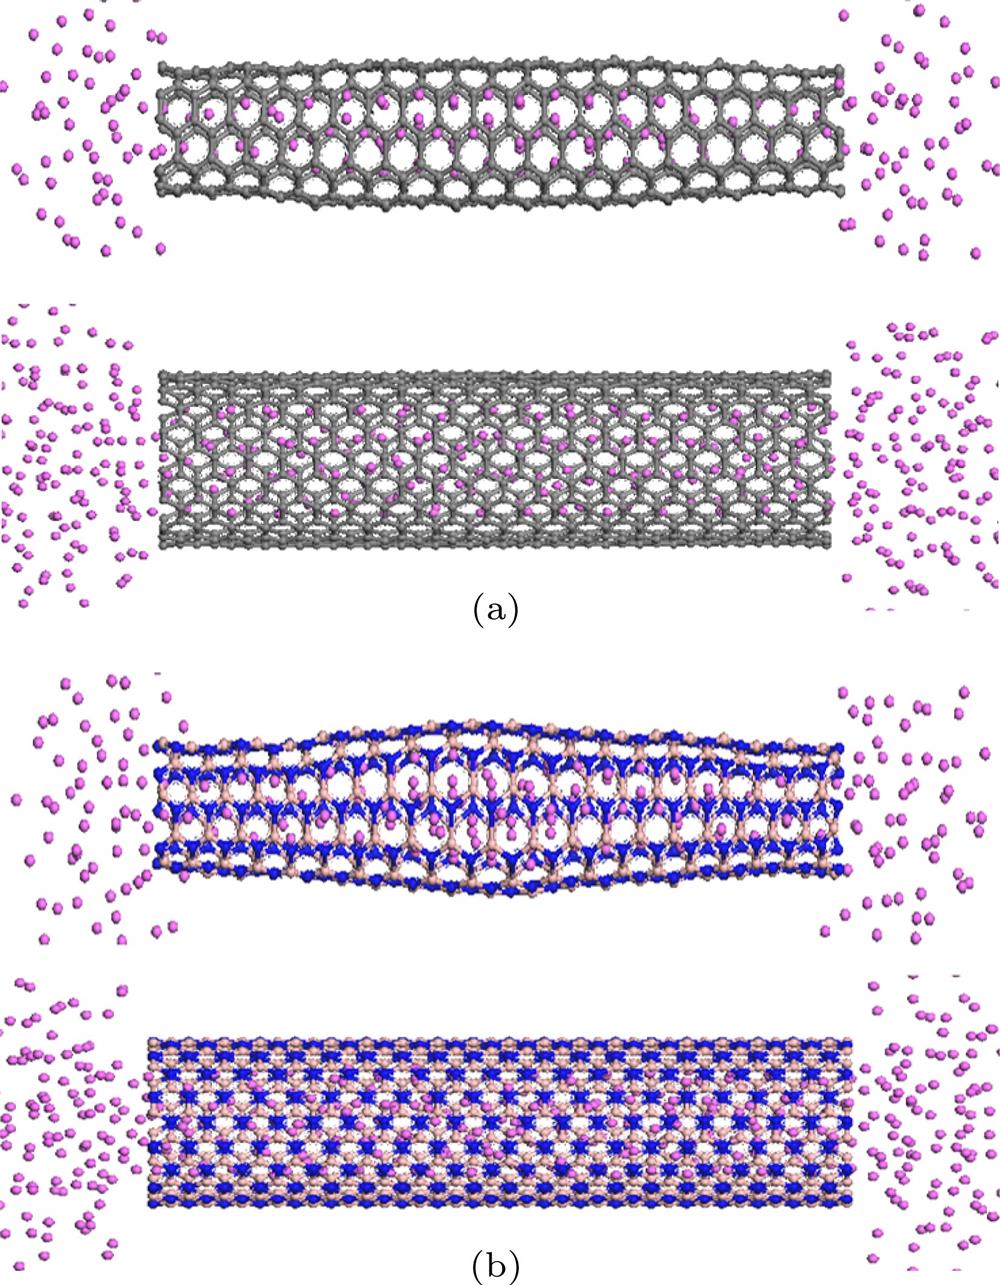 Models of the microstructure evolution of the aluminum atoms filled in CNT (n, n) and BNNT (n, n) nanotubes: (a) CNT (5, 5) and CNT (10, 10); (b) BNNT (5, 5) and BNNT (10, 10).铝原子在CNT (n, n)和BNNT (n, n)纳米管内微结构演变模型 (a) CNT (5, 5)和CNT (10, 10); (b) BNNT (5, 5)和BNNT (10, 10)